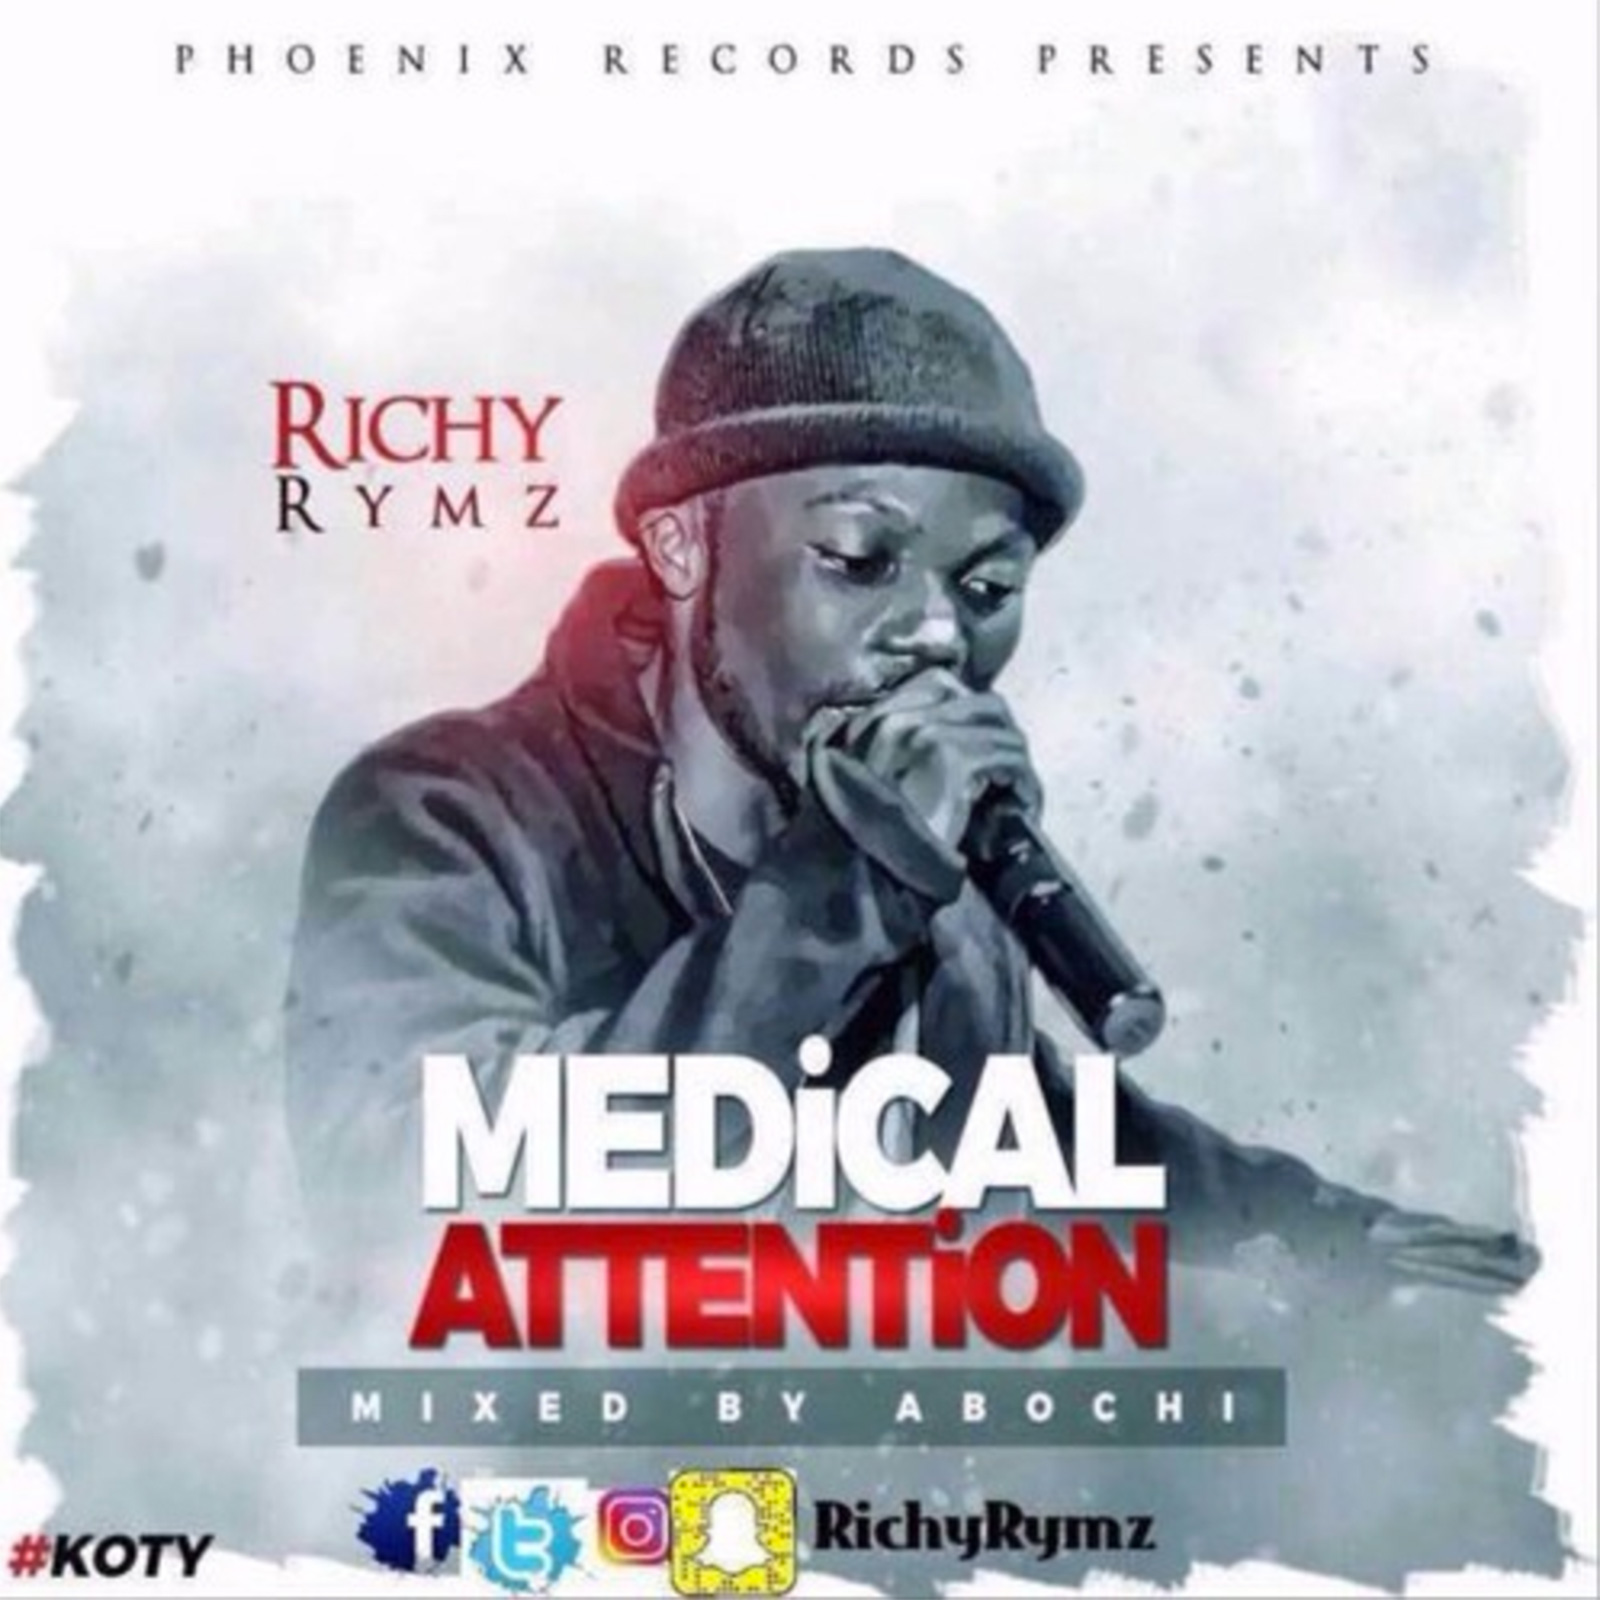 Medical Attention by Richy Rymz